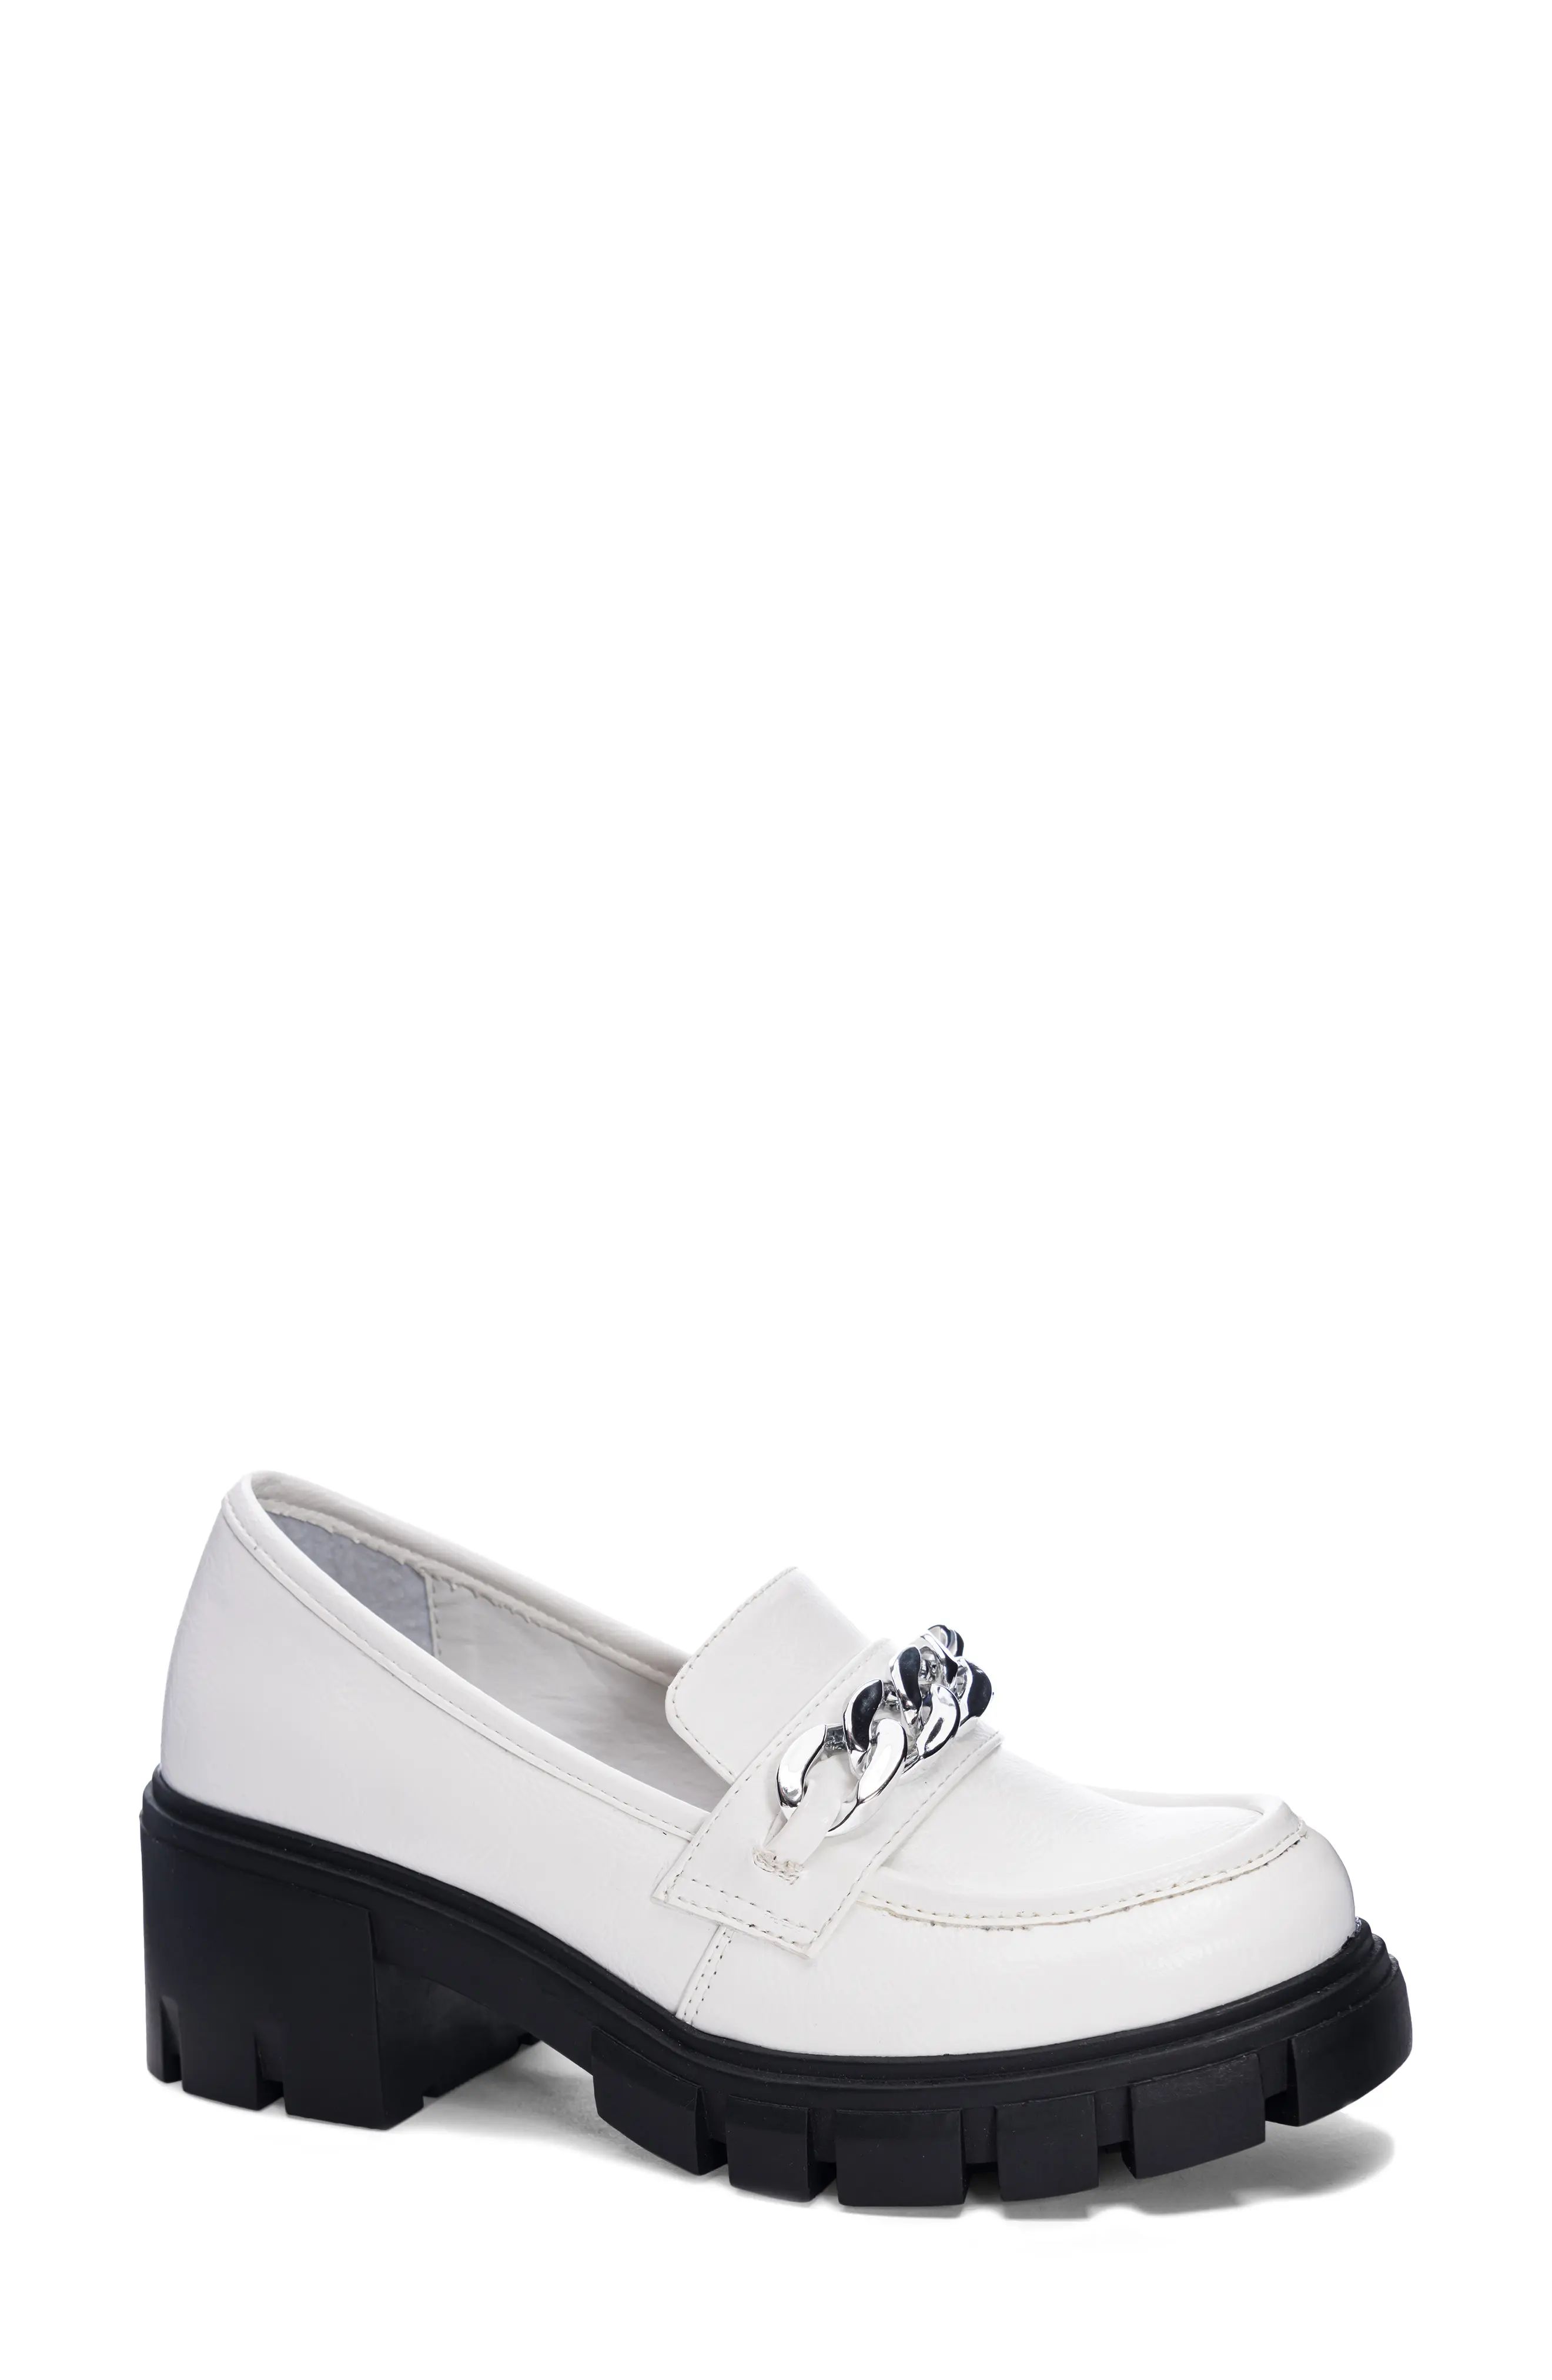 Dirty Laundry Nirvana Chill Loafer in White at Nordstrom, Size 7 | Nordstrom